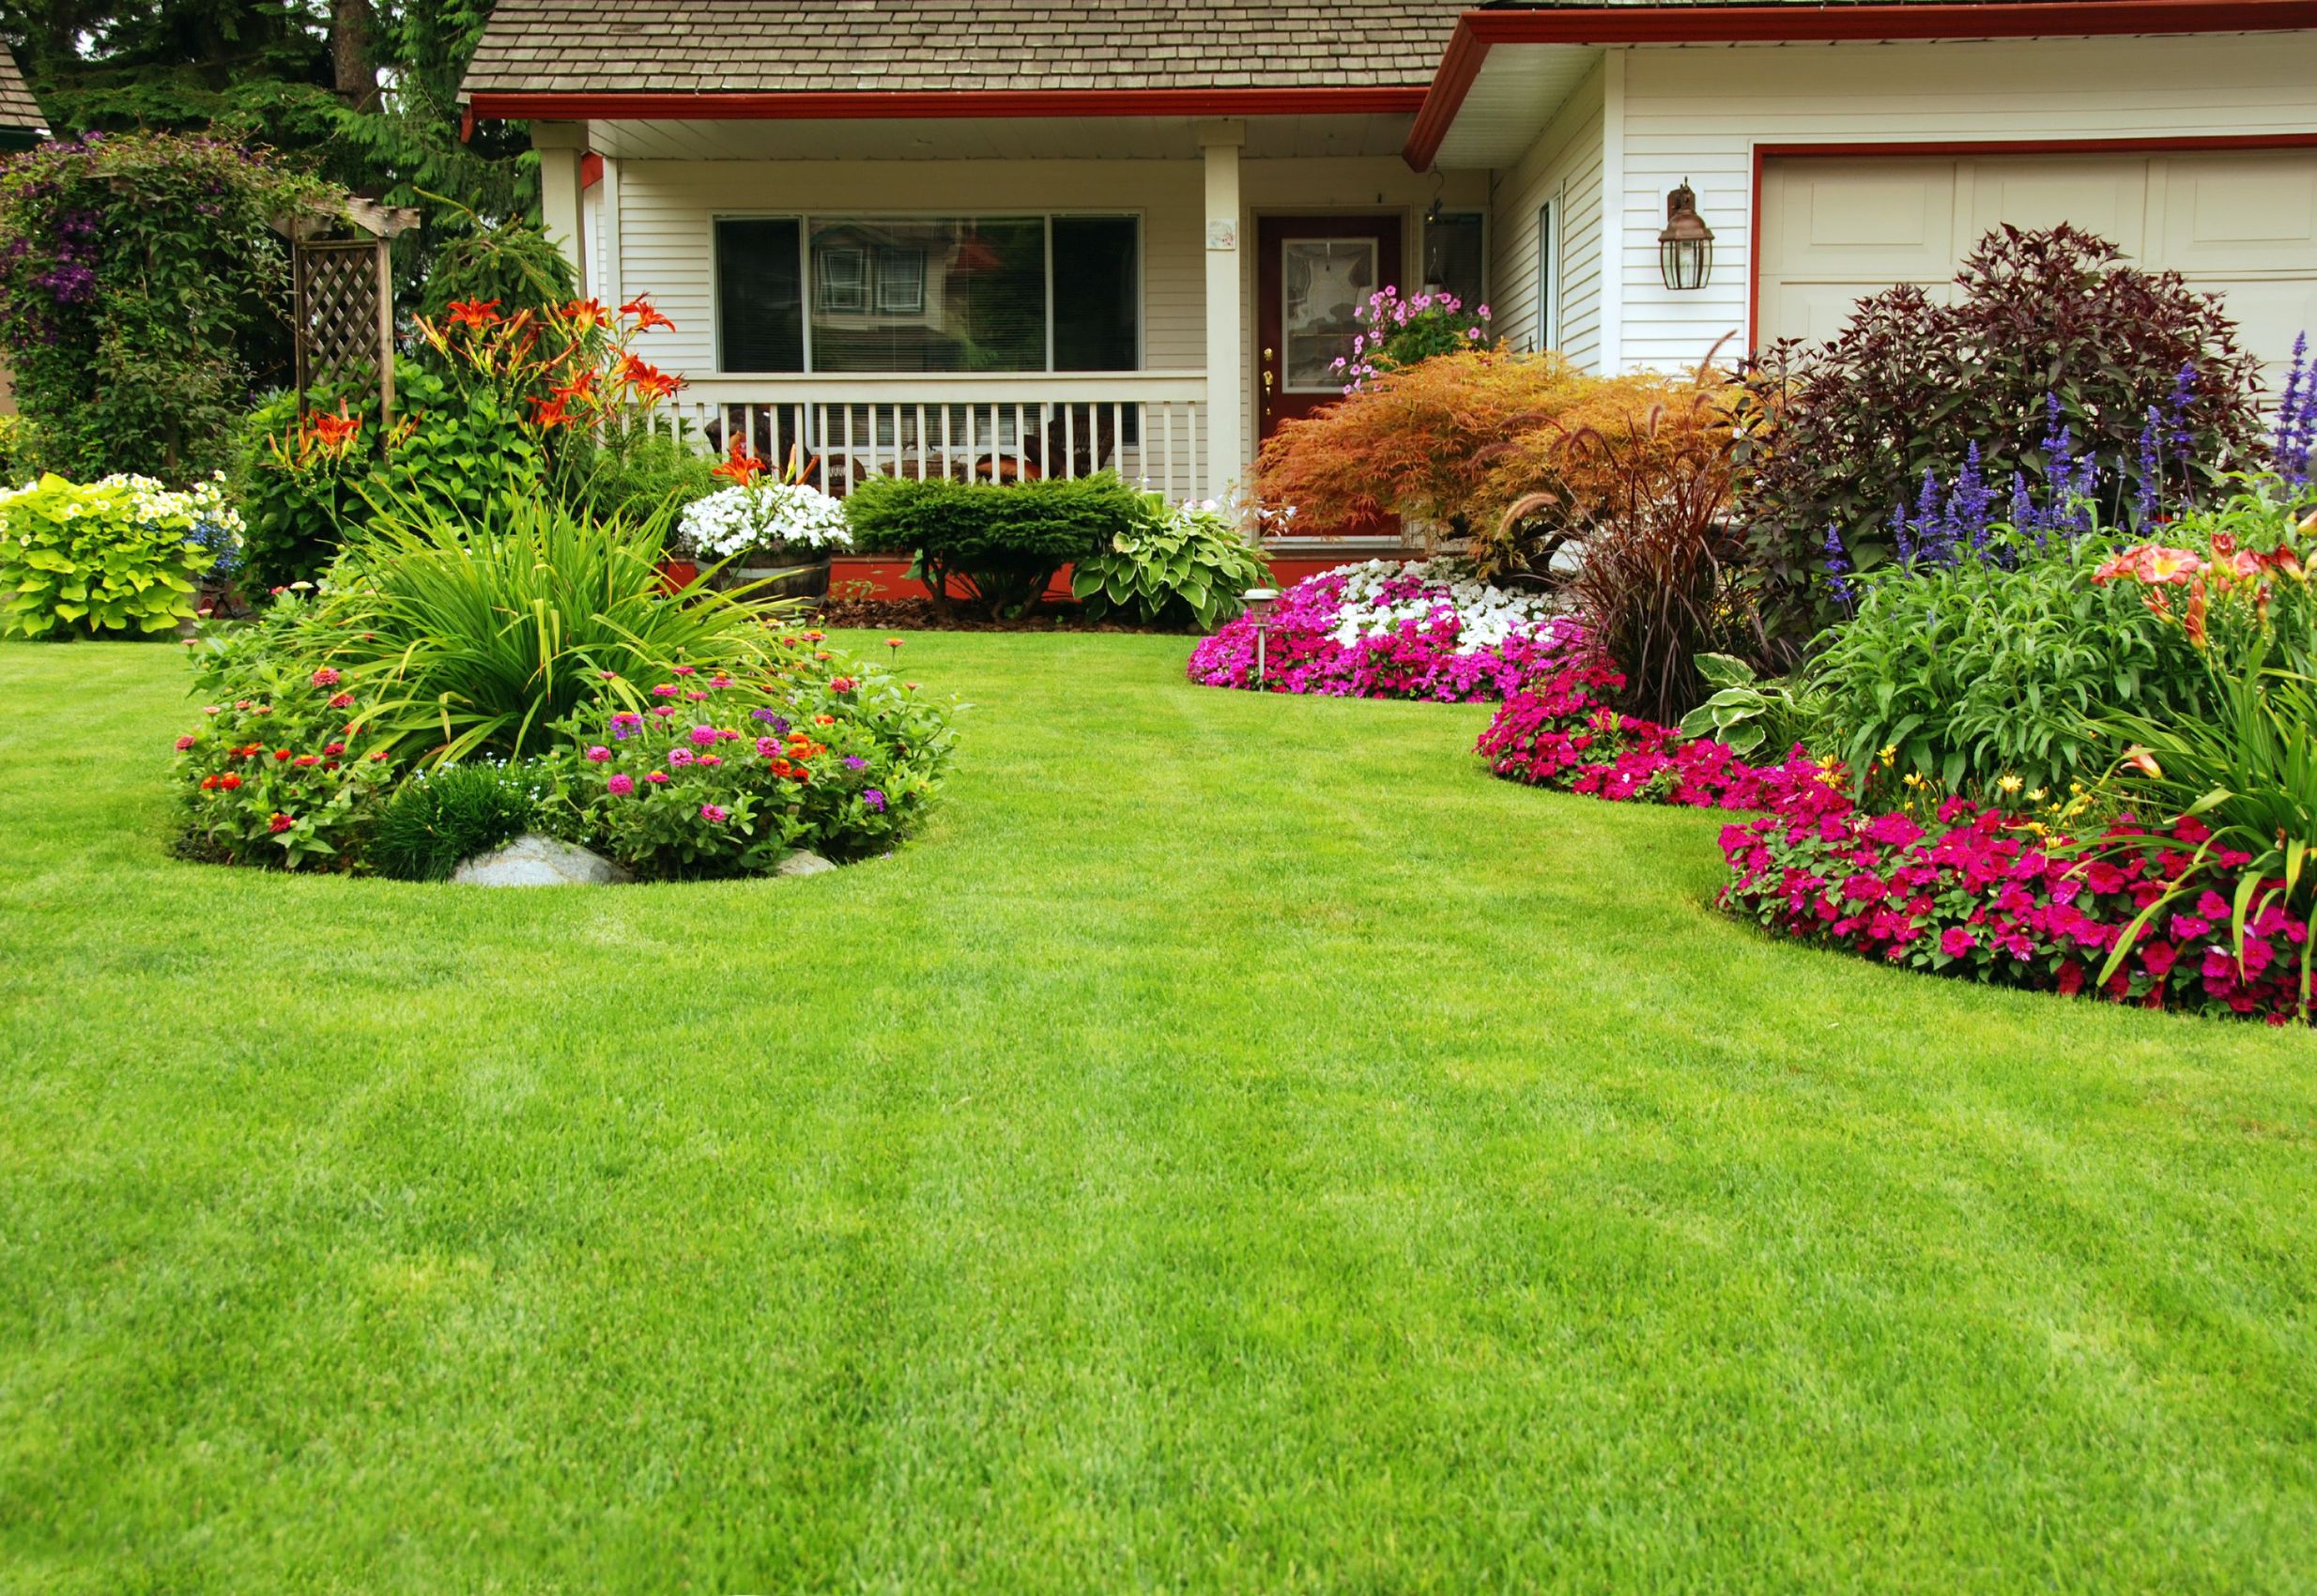 Creating Stunning Outdoor Spaces with a Landscaper in Plymouth, MN